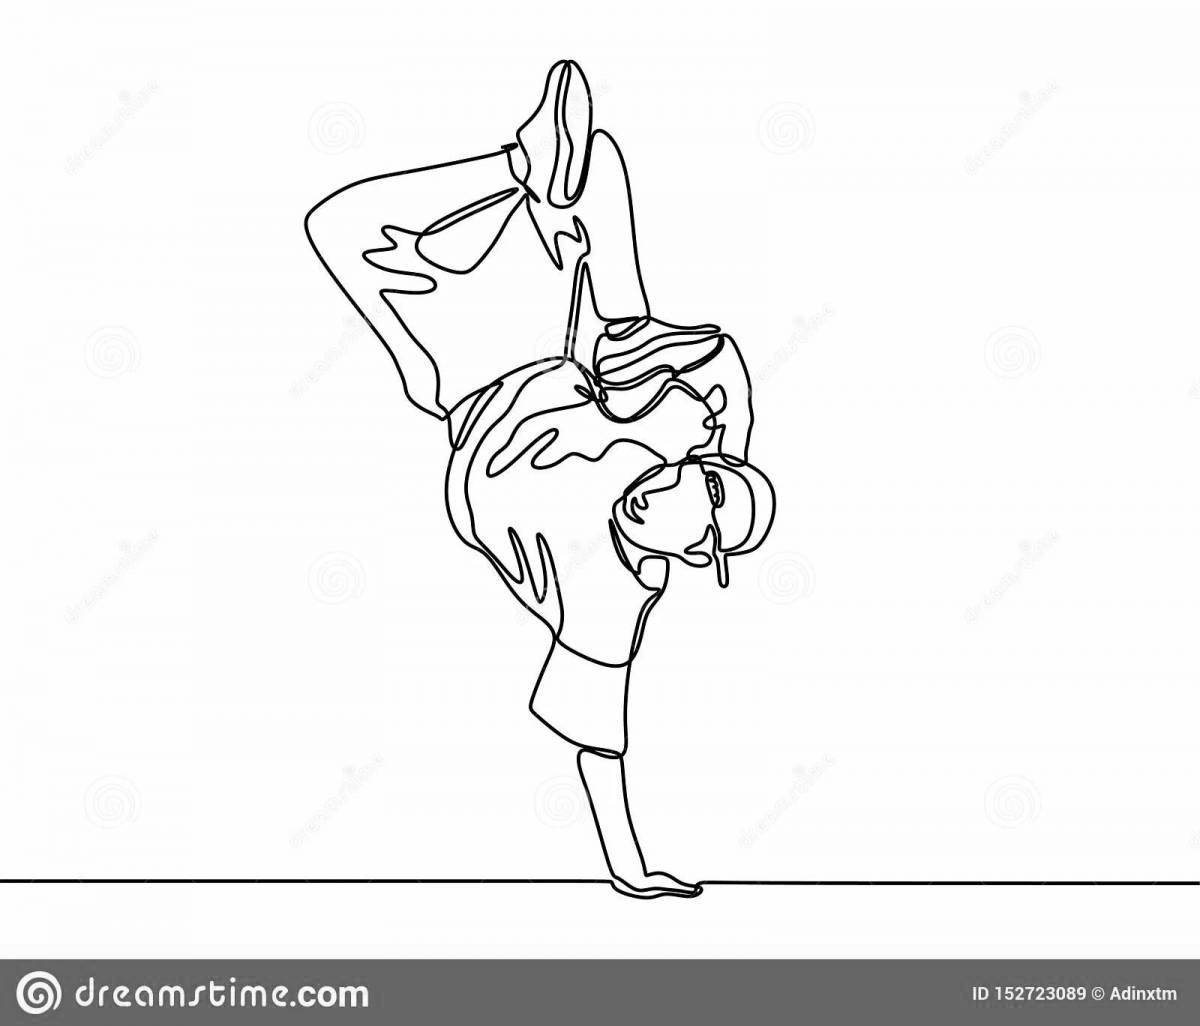 Coloring book funny breakdance